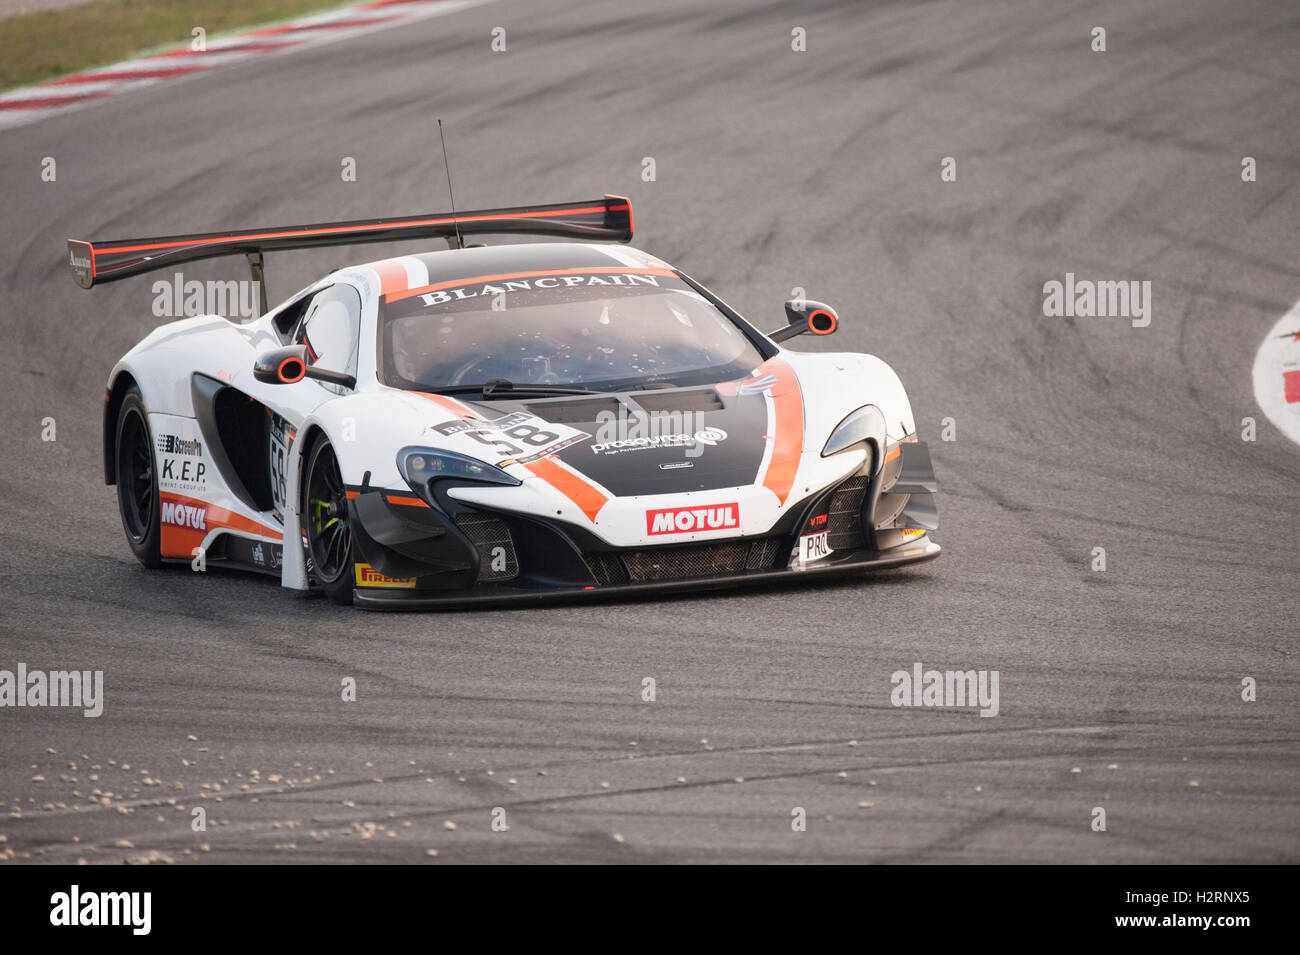 Barcelona, Spain. 2nd October, 2016. The Mclaren 650S GT3 Blancpain GT Series of the Garage 59 Team, driven by Rob Bell and Álvaro Parente, in action during the Festival de la Velocidad de Barcelona at the Circuit of Catalunya. Credit:  Pablo Guillen/Alamy Live News Stock Photo